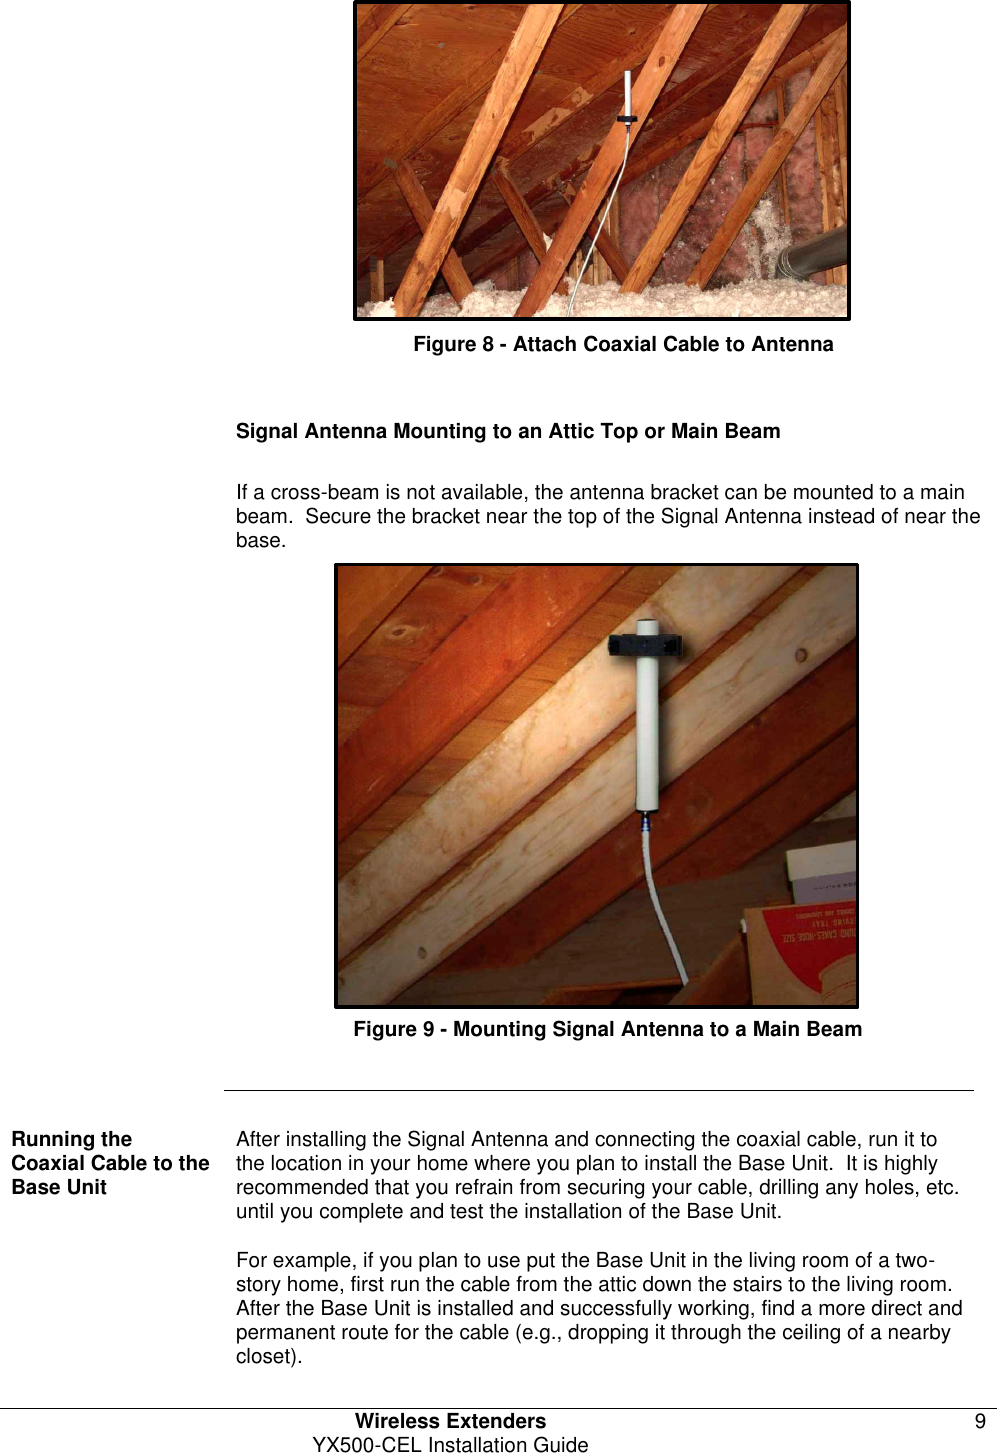   Wireless Extenders 9 YX500-CEL Installation Guide            Figure 8 - Attach Coaxial Cable to Antenna   Signal Antenna Mounting to an Attic Top or Main Beam  If a cross-beam is not available, the antenna bracket can be mounted to a main beam.  Secure the bracket near the top of the Signal Antenna instead of near the base.             Figure 9 - Mounting Signal Antenna to a Main Beam       Running the  Coaxial Cable to the Base Unit After installing the Signal Antenna and connecting the coaxial cable, run it to the location in your home where you plan to install the Base Unit.  It is highly recommended that you refrain from securing your cable, drilling any holes, etc. until you complete and test the installation of the Base Unit.   For example, if you plan to use put the Base Unit in the living room of a two-story home, first run the cable from the attic down the stairs to the living room.  After the Base Unit is installed and successfully working, find a more direct and permanent route for the cable (e.g., dropping it through the ceiling of a nearby closet). 